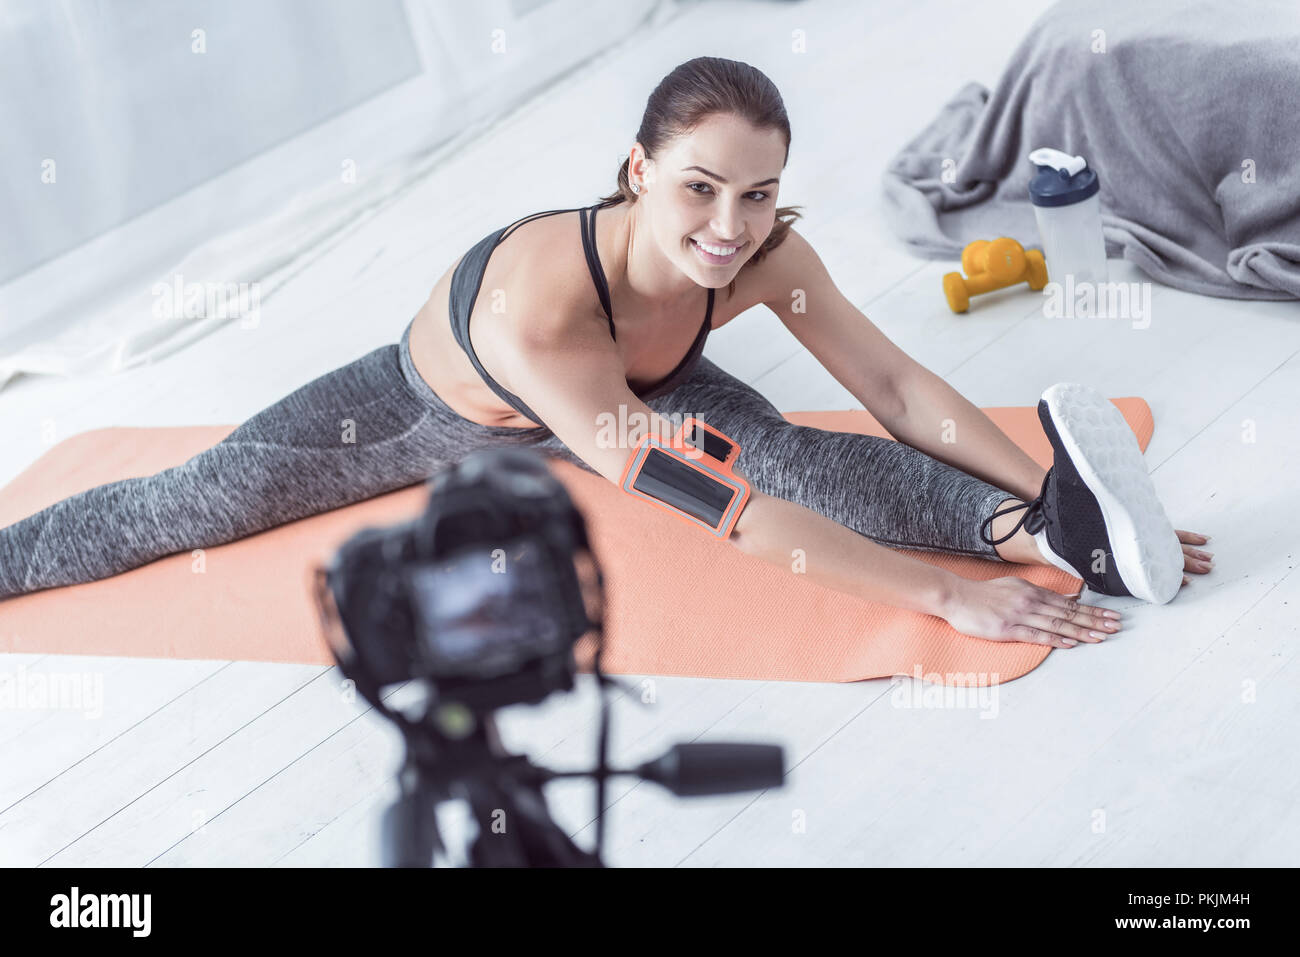 Delighted positive woman sitting on a yoga mat Stock Photo